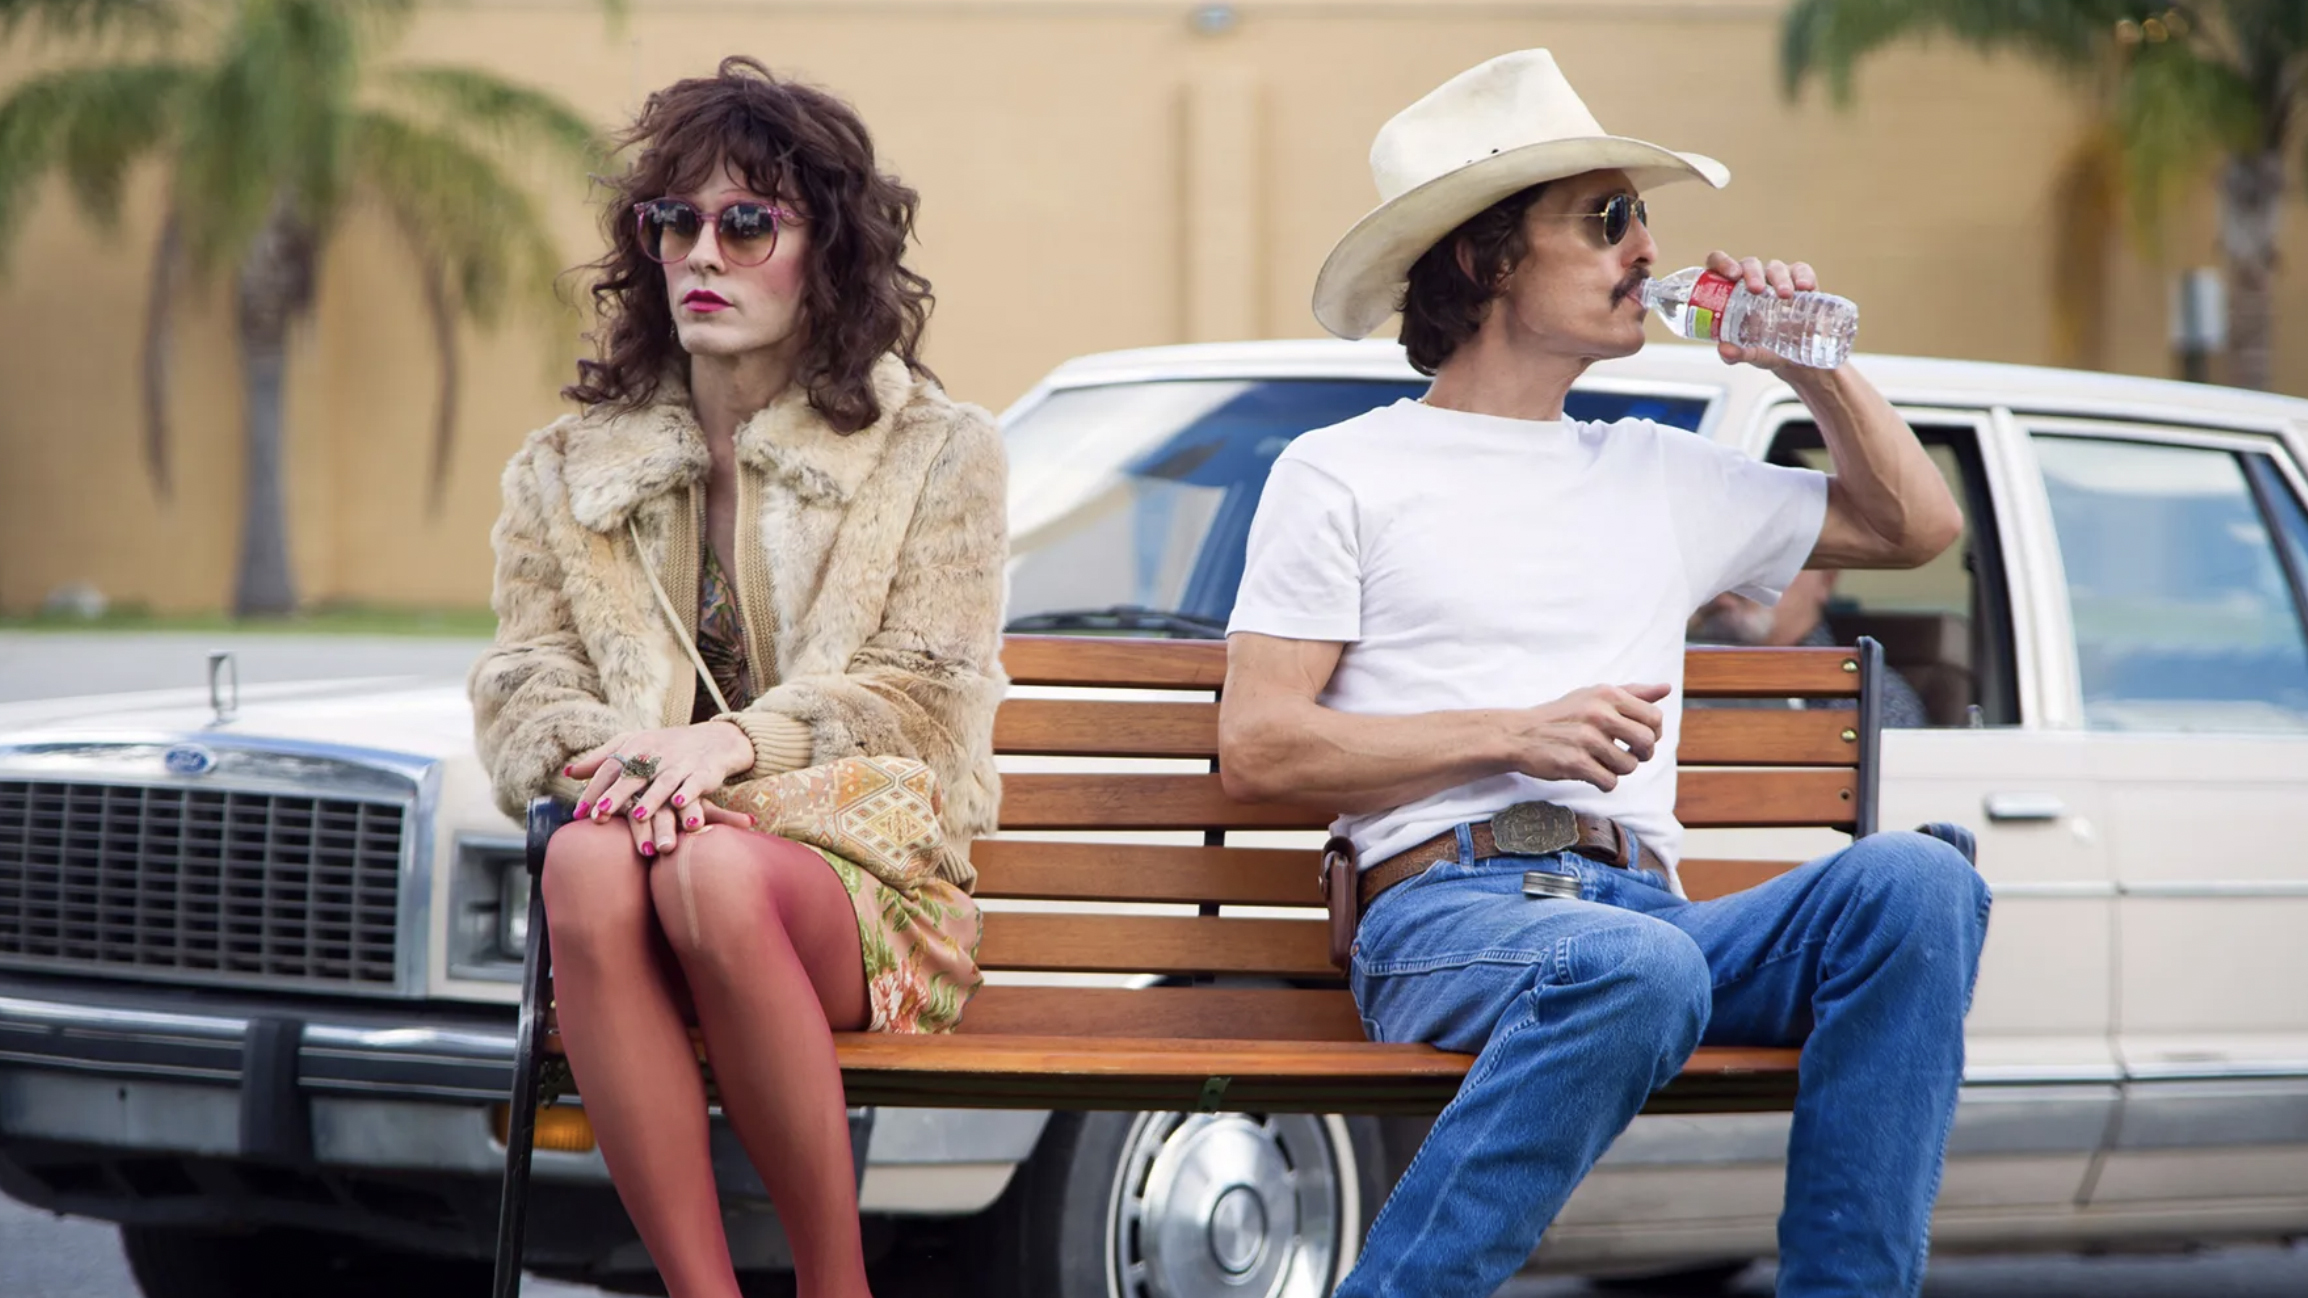 A still from the movie Dallas Buyers Club in which Jared Leto's character Rayon sits on a bench with Matthew McConaughey as Ron Woodroof.